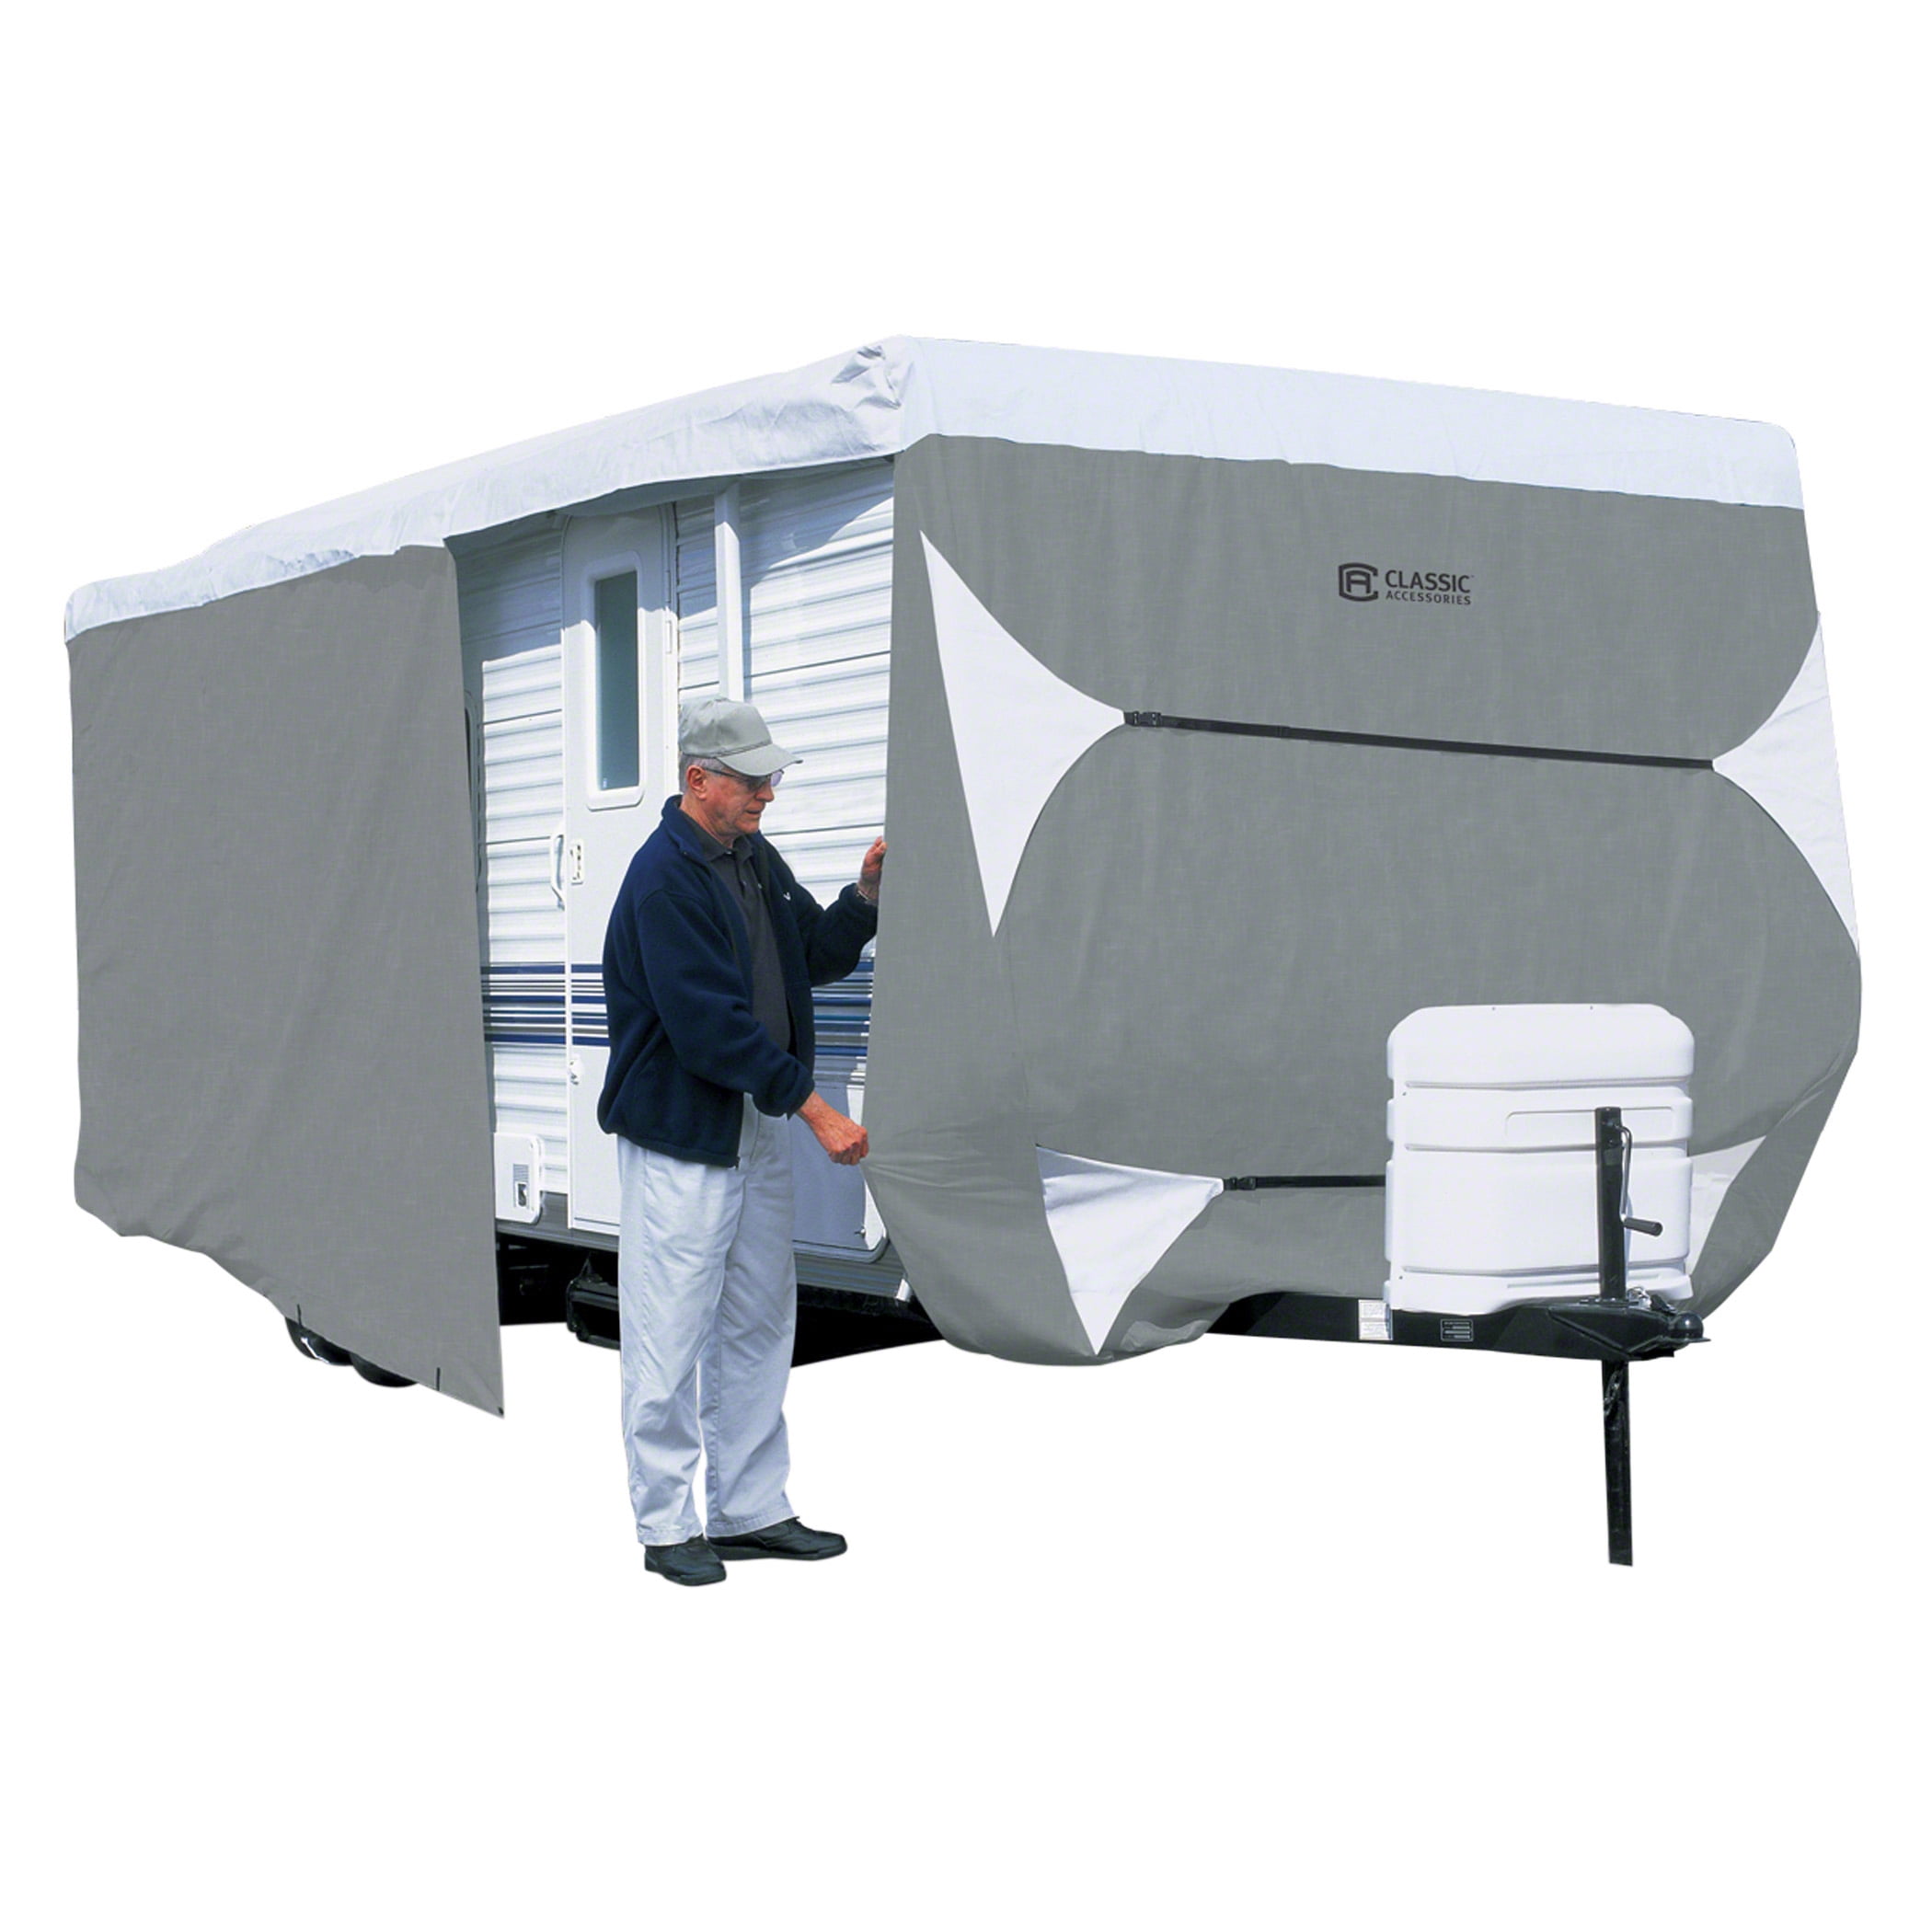 OOFIT Travel Trailer Cover Fits for 24-27 Harsh Weather Protection 4 Layers Fabric Anti UV Waterproof Breathable